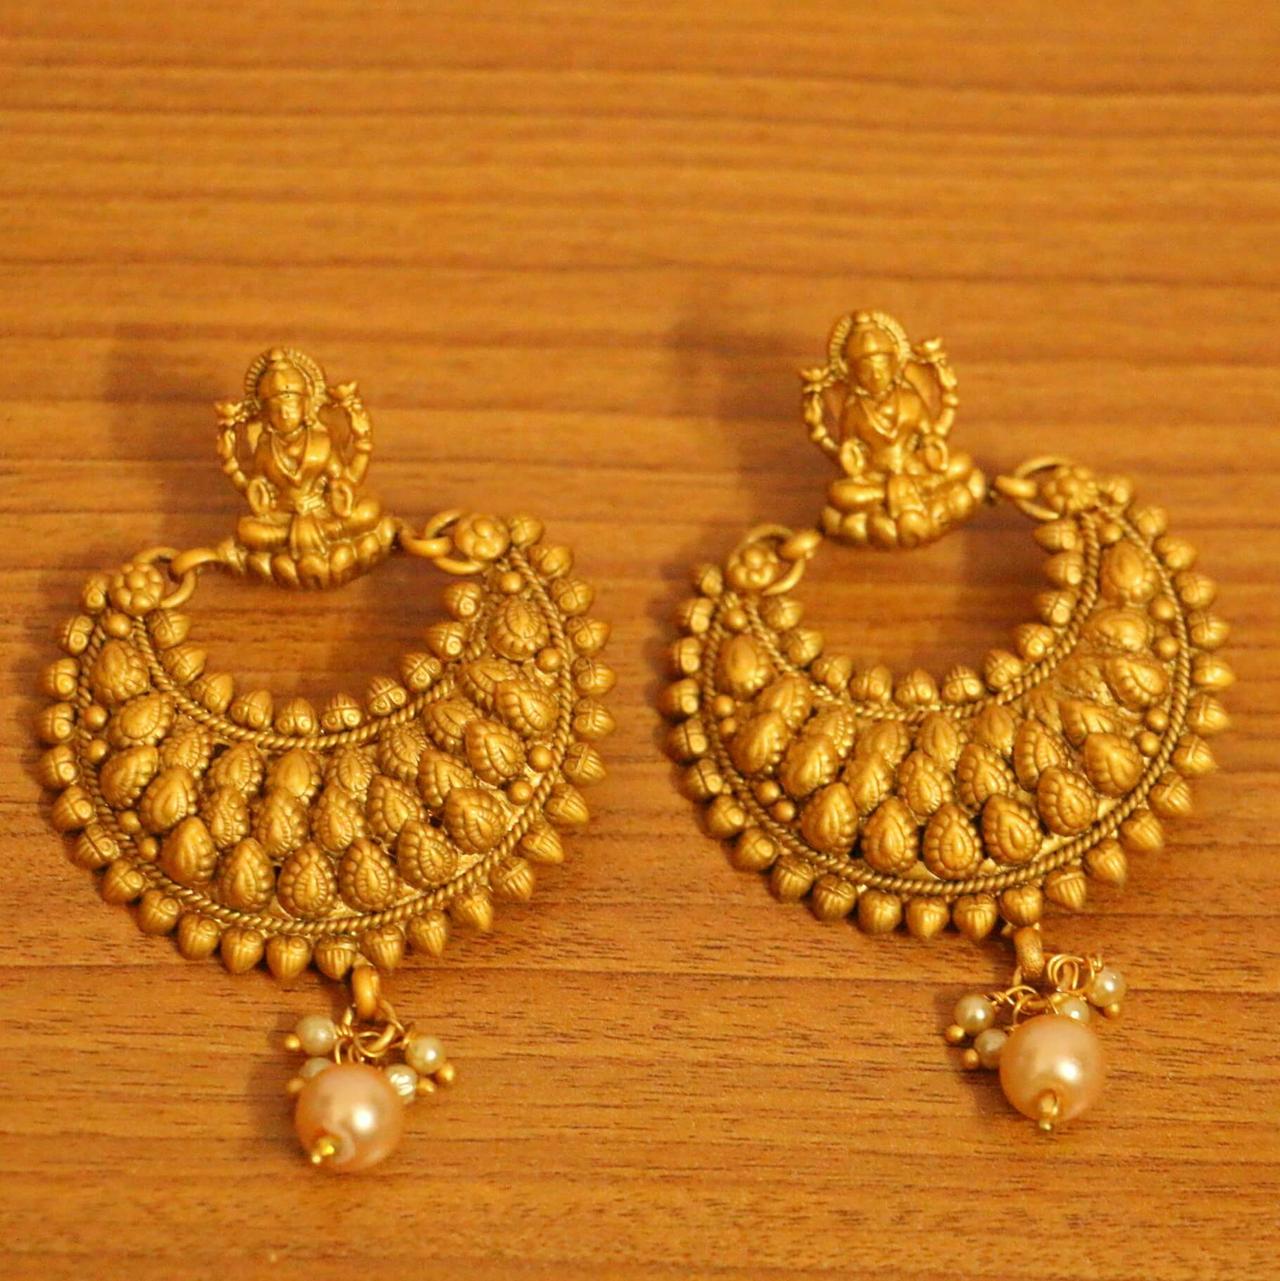 Stunning Temple Jewellery Set Designs That Can Amp Up Any Attire